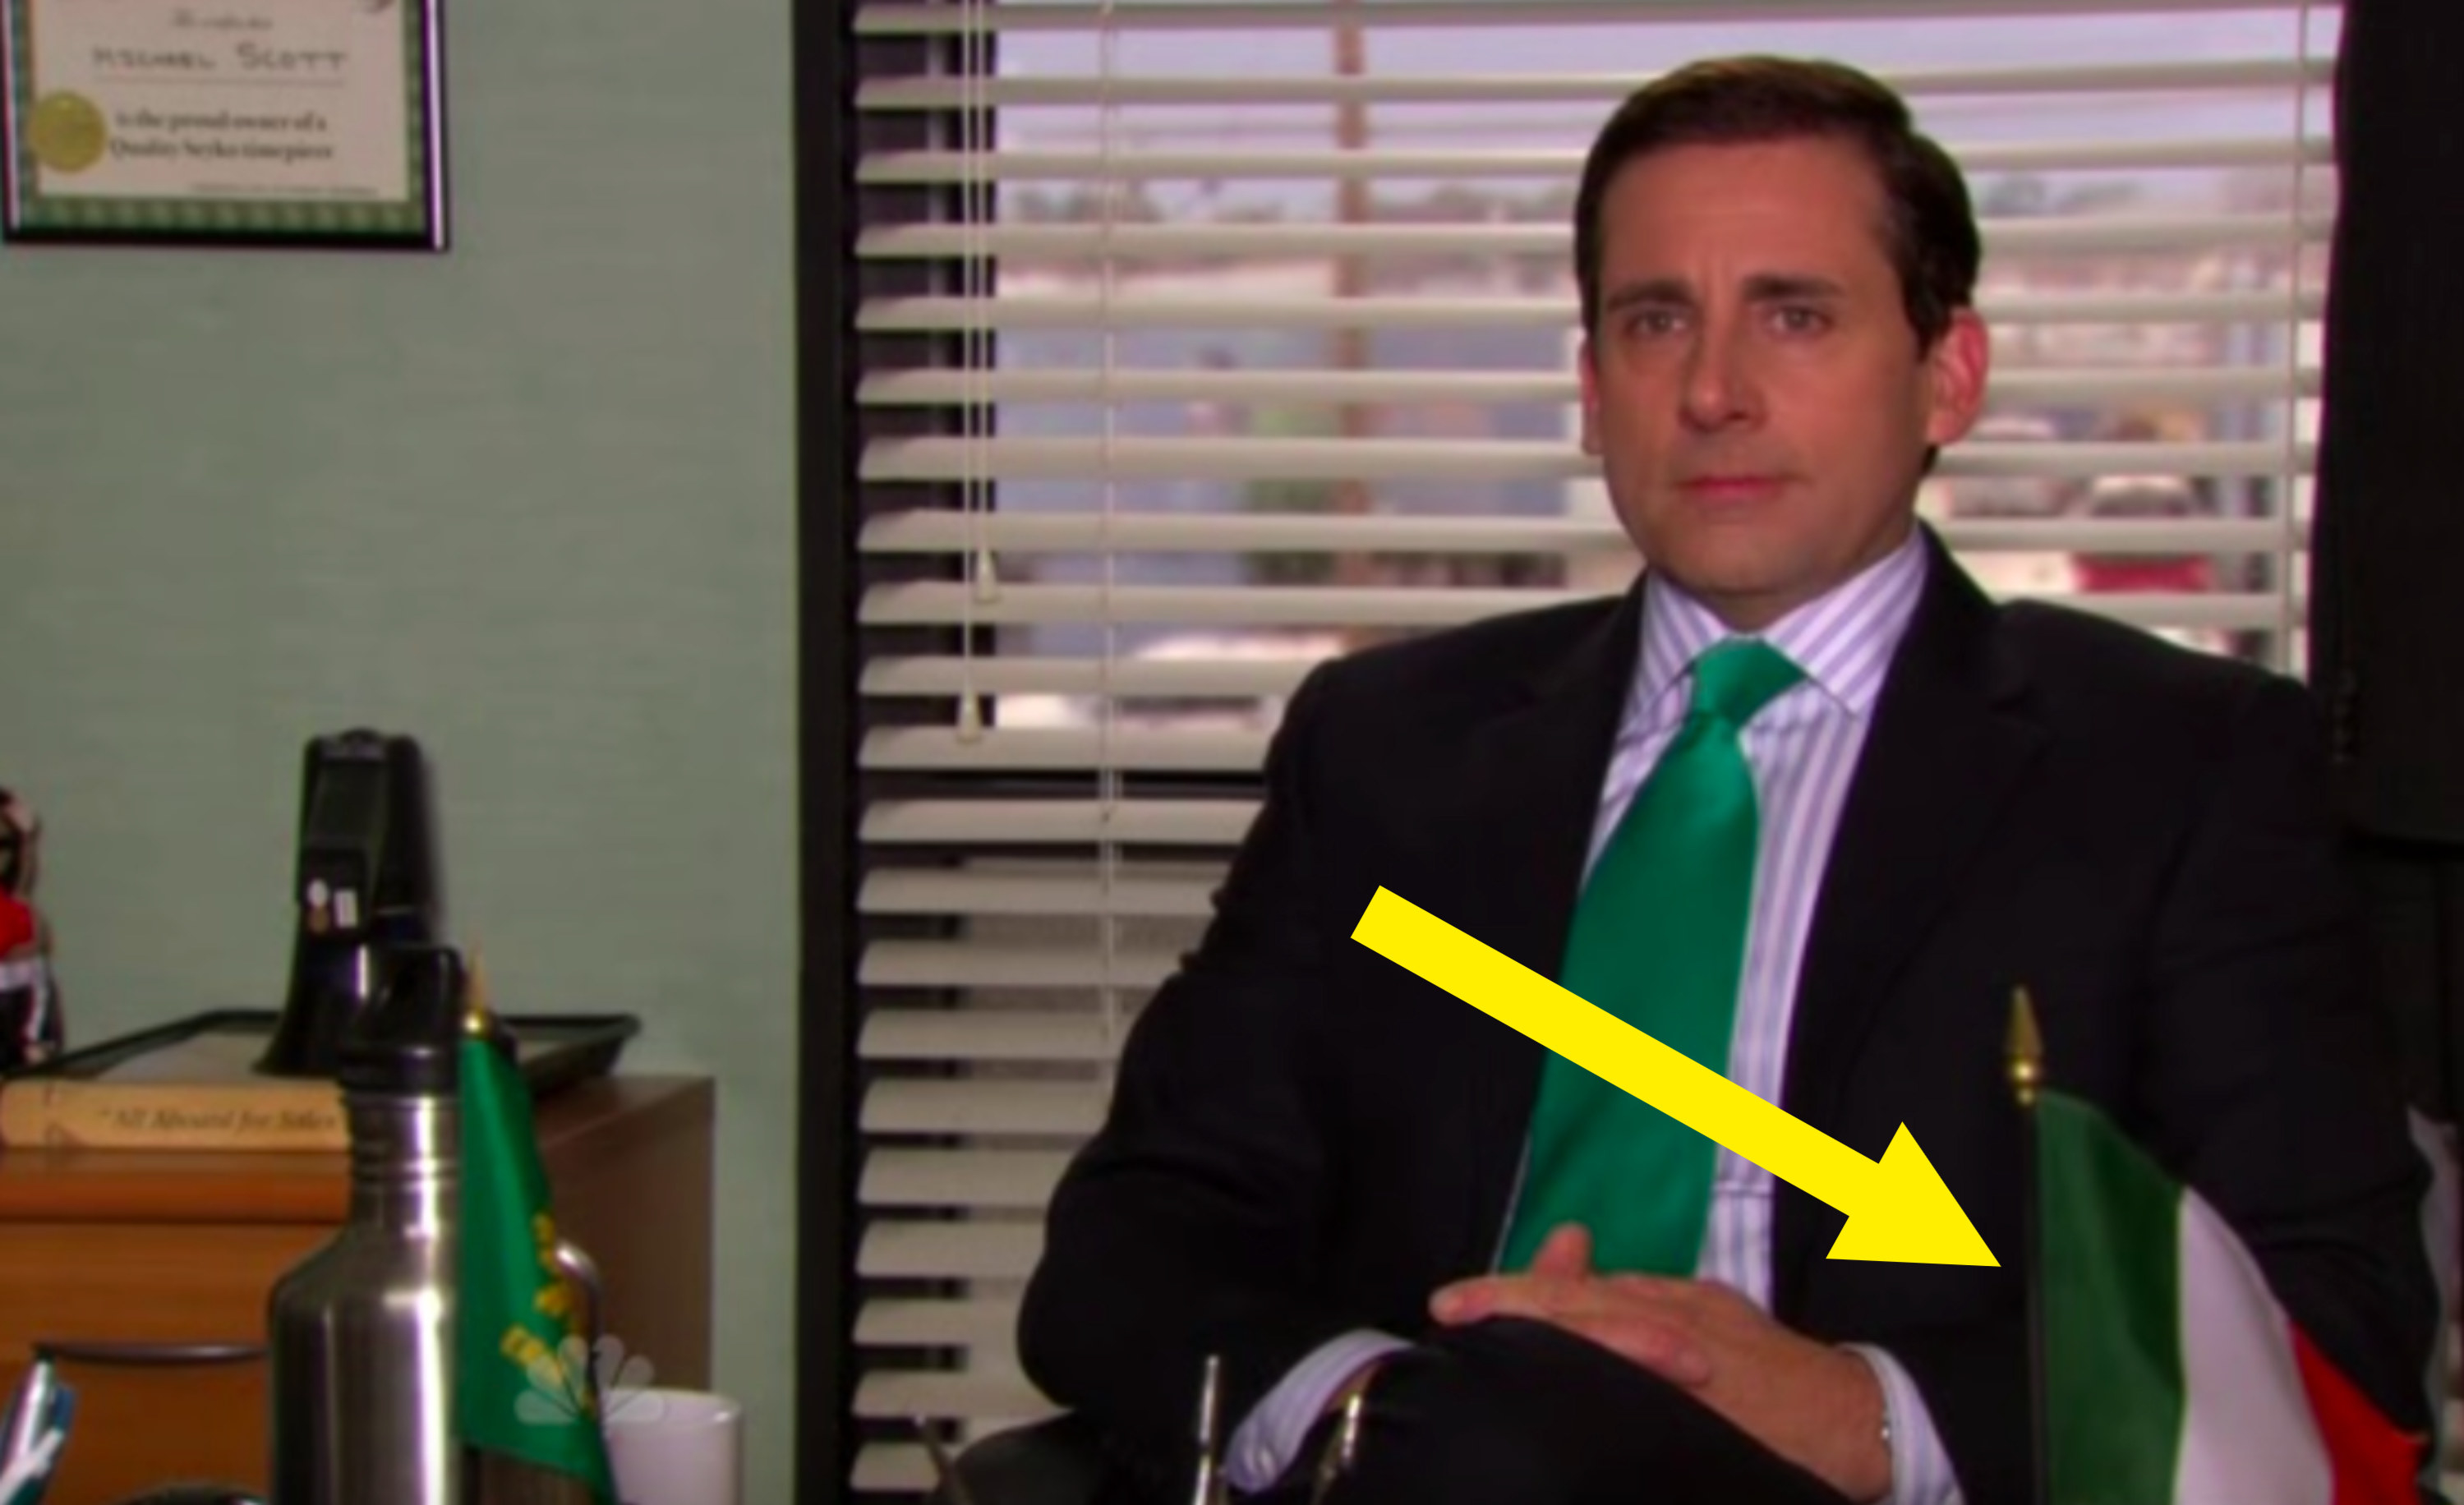 Arrow pointing to flag